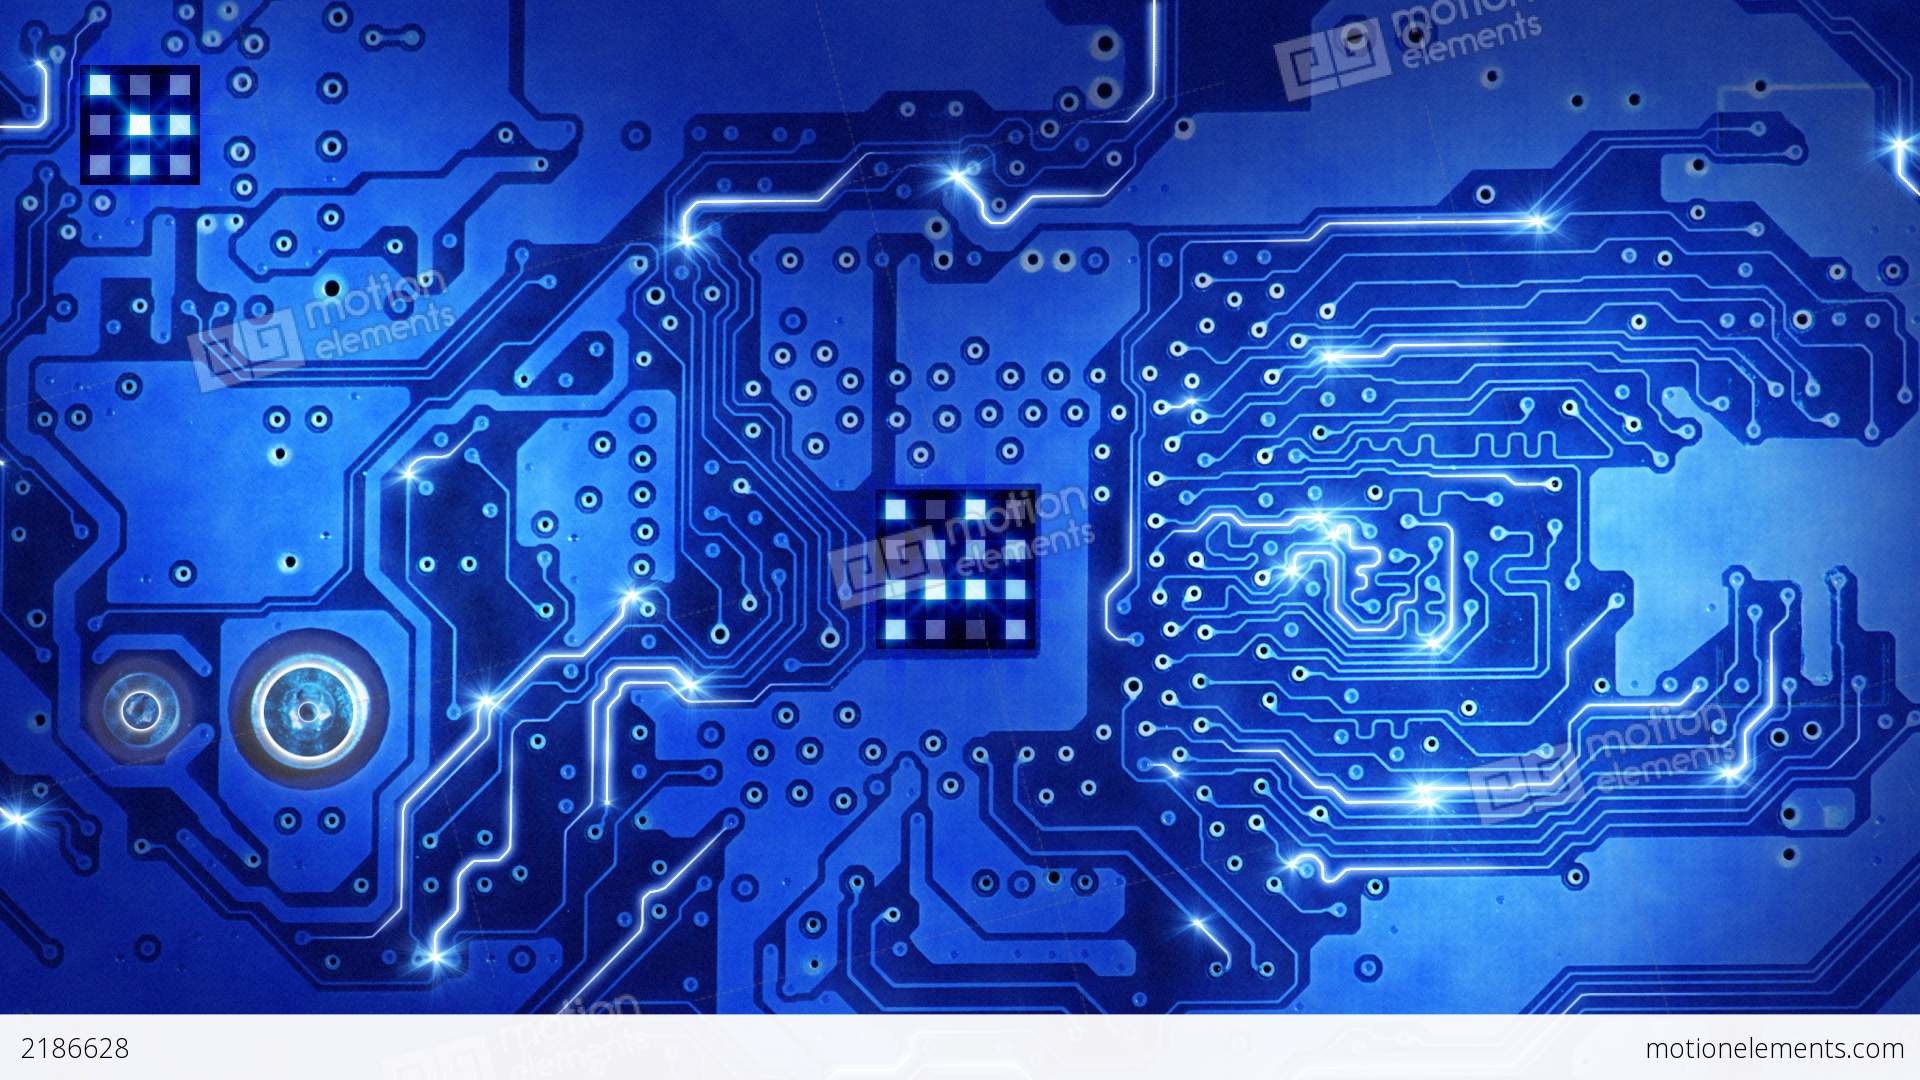 1920x1080 me2186628-computer-circuit-board-blue-loopable-background-hd- Â· Wallpaper  Backgrounds